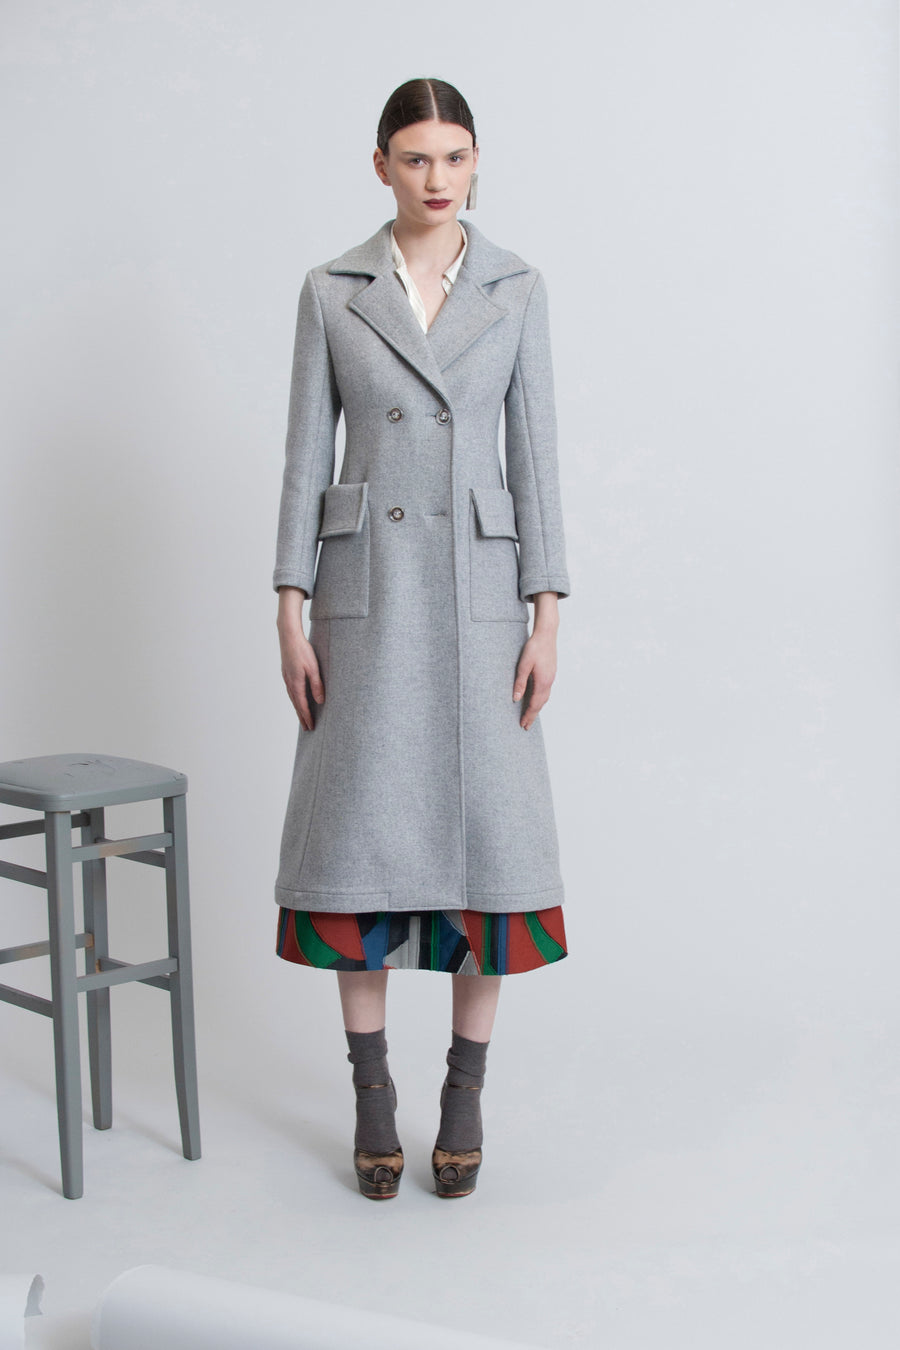 AW2015 / Look 22